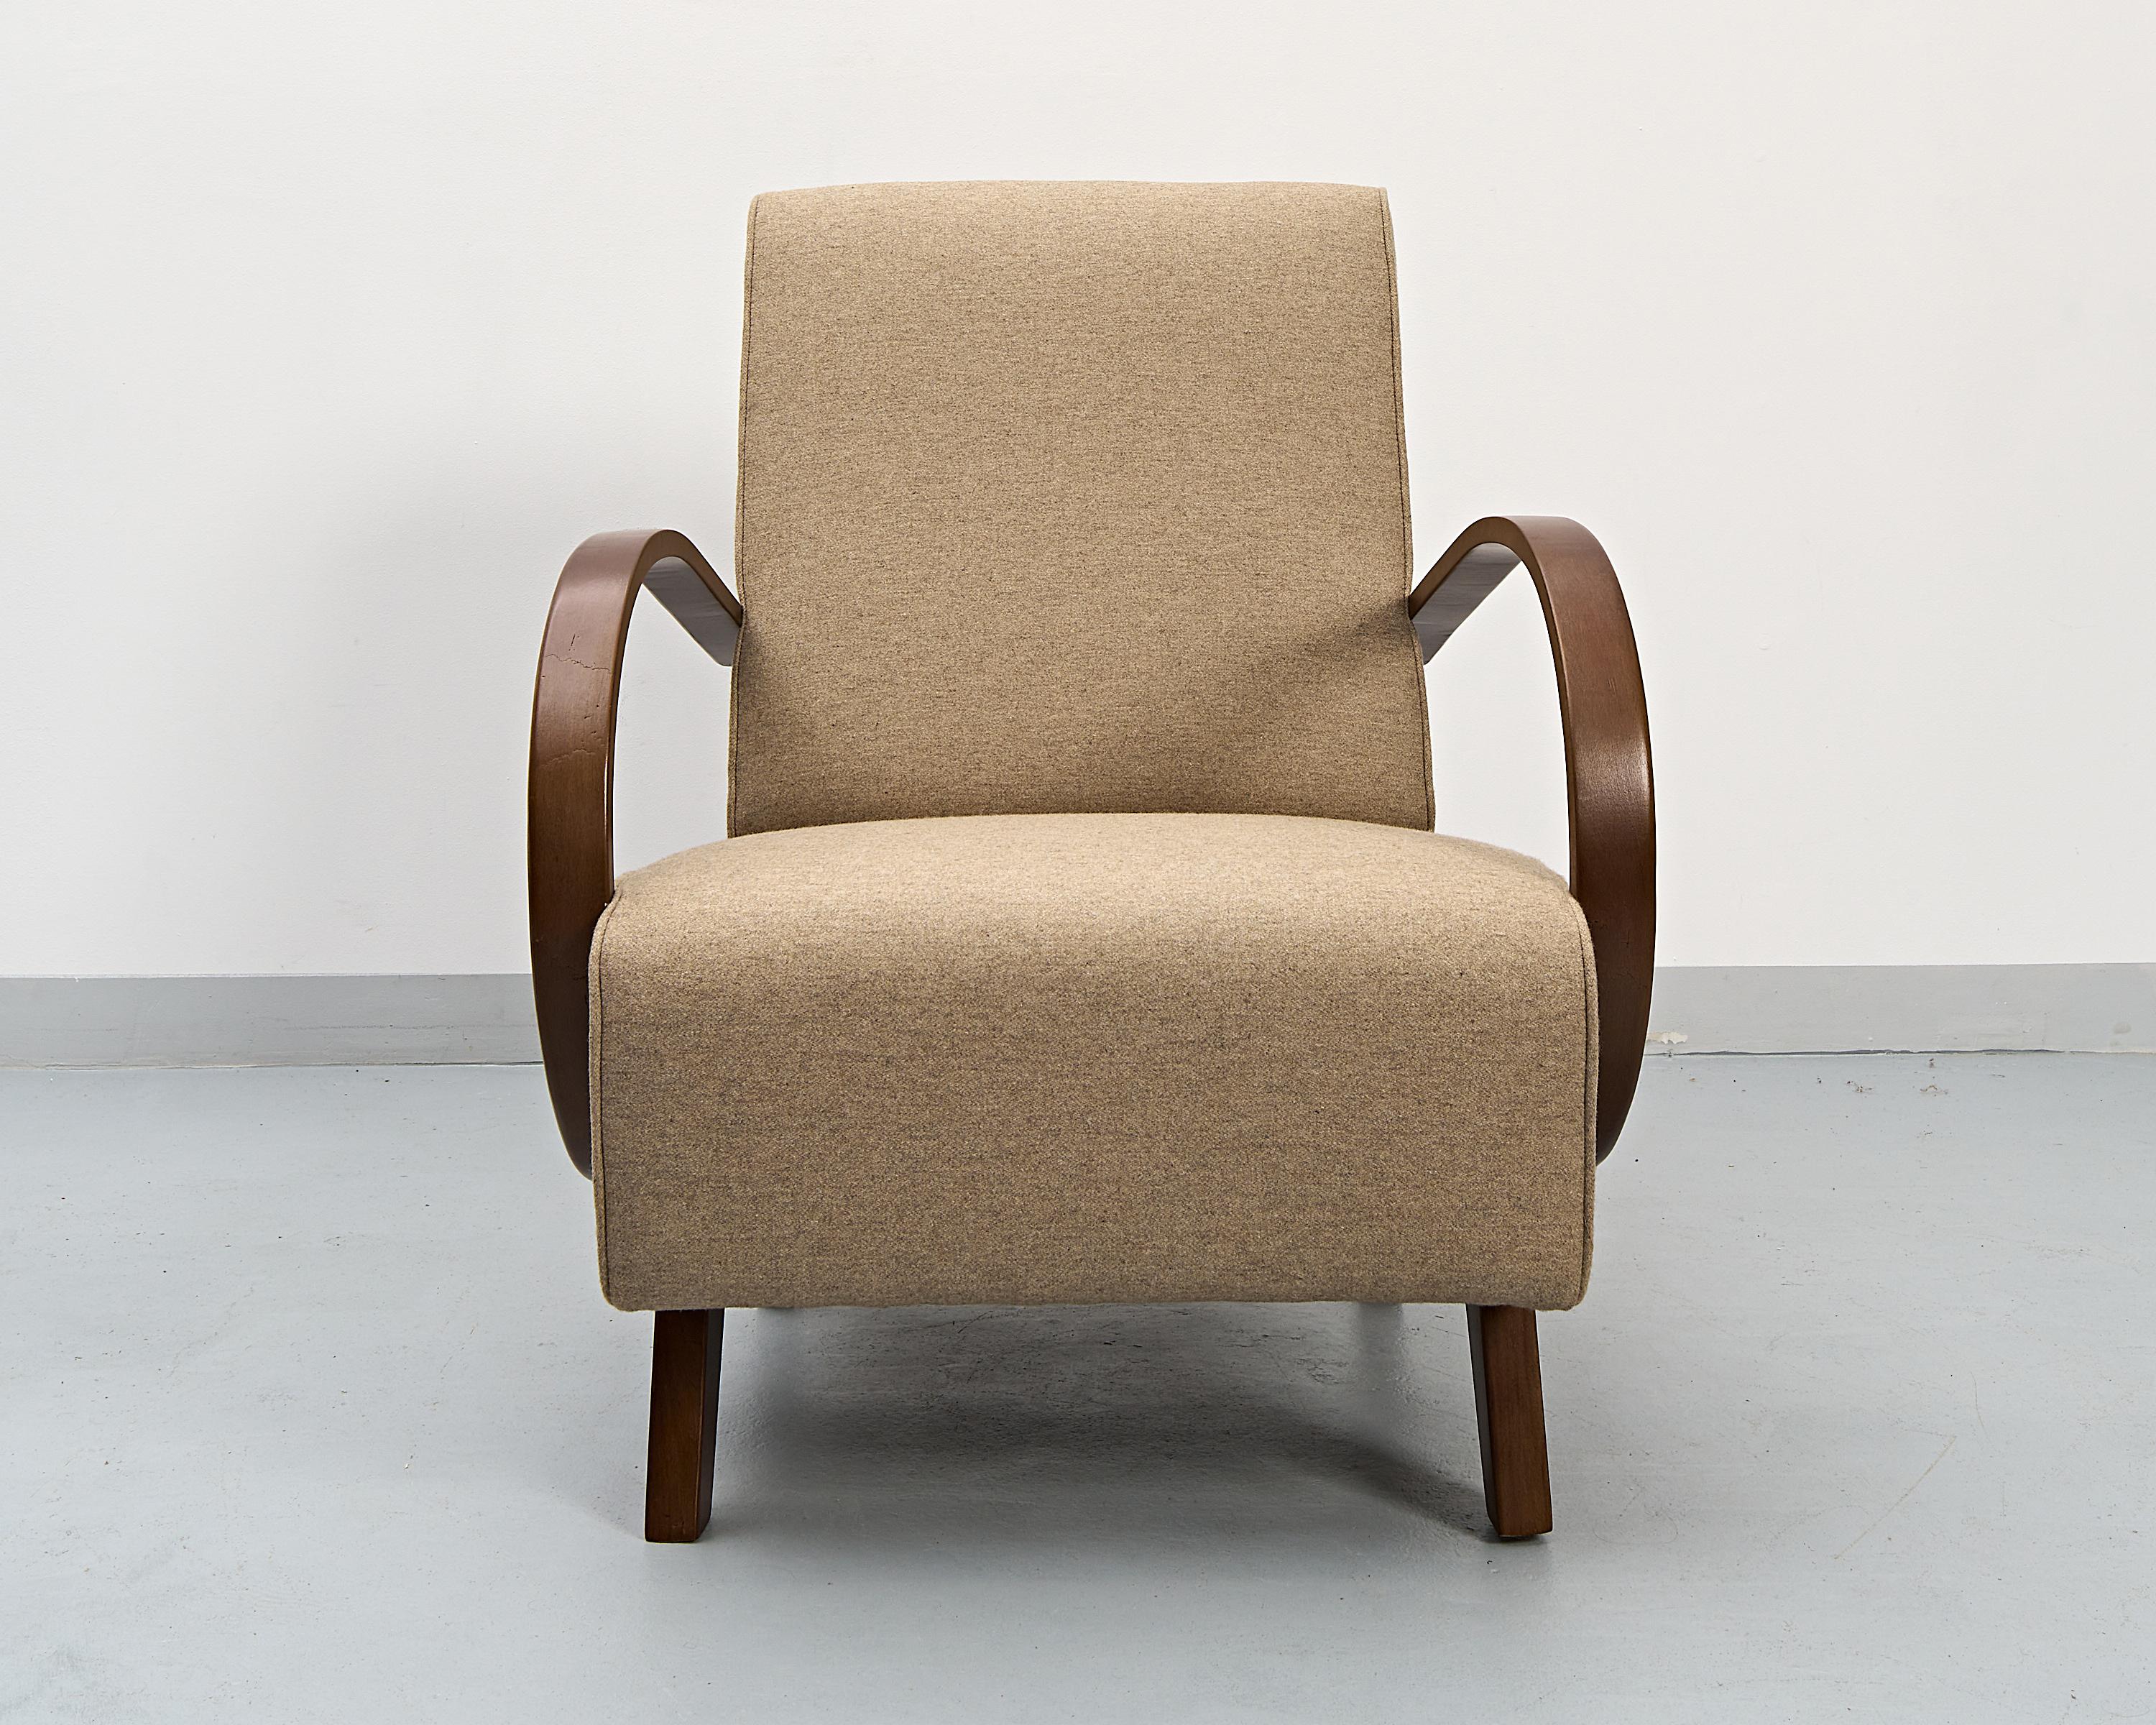 An armchair designed by the world famous Czech designer Jindřich Halabala. Produced during the 1930's.
Bent beechwood frame restored to half matt gloss. Seating recreated and covered in artificial wool fabric.
Beautiful restoration work.